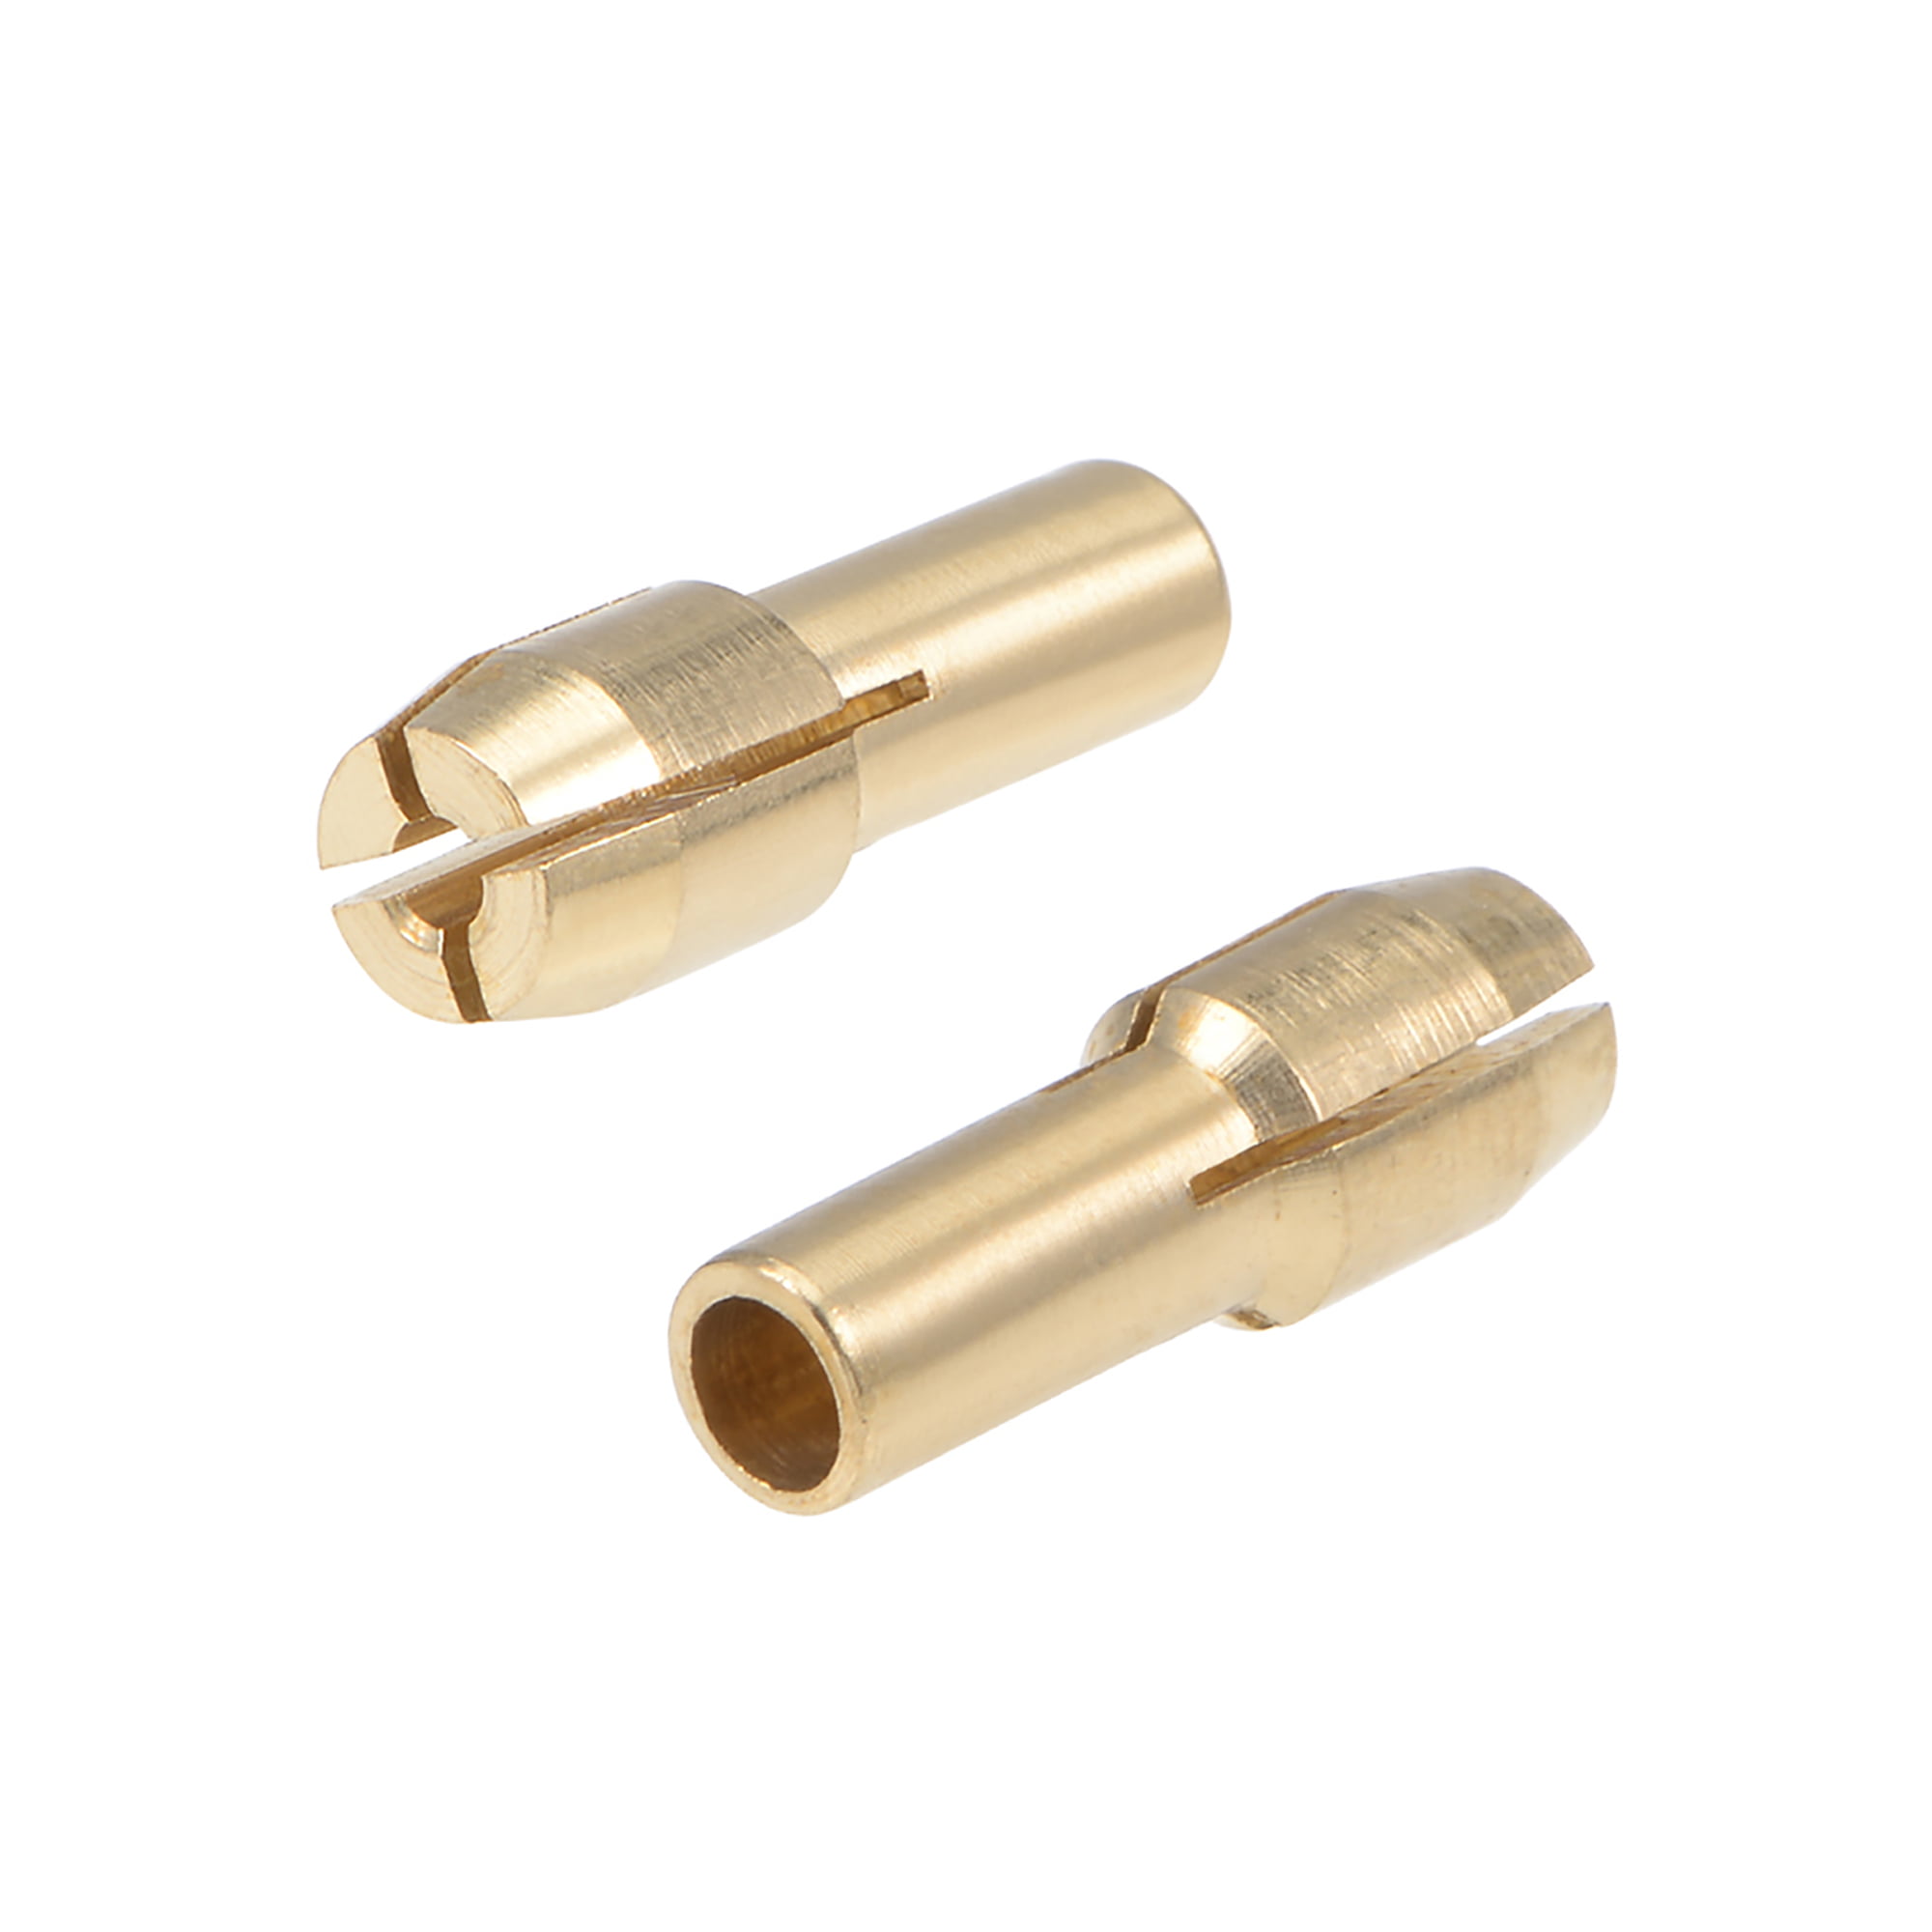 20Pcs Brass Drill Chuck Collet Bits 1.0mm/1.6mm/2.35mm/3.2mm For Rotary Tool Set 